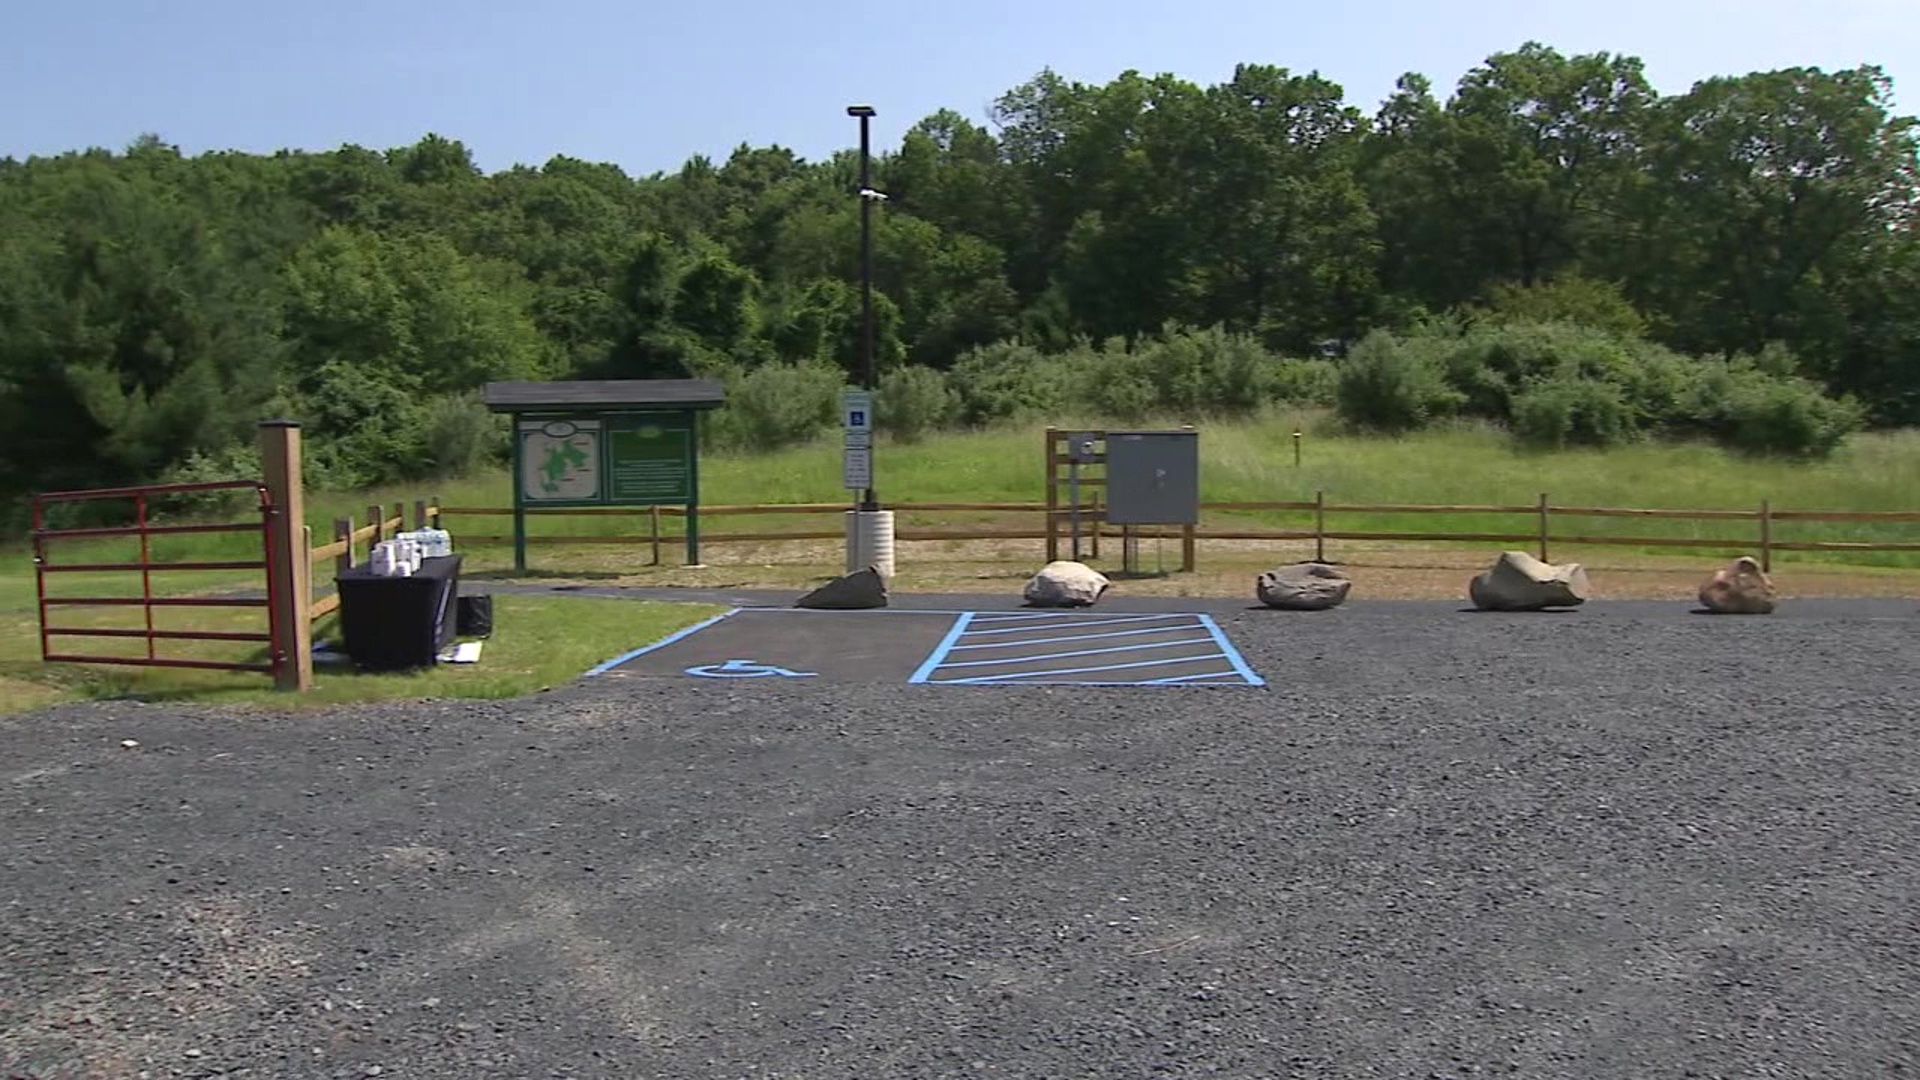 The new trail facility near Brodheadsville was opened Monday.